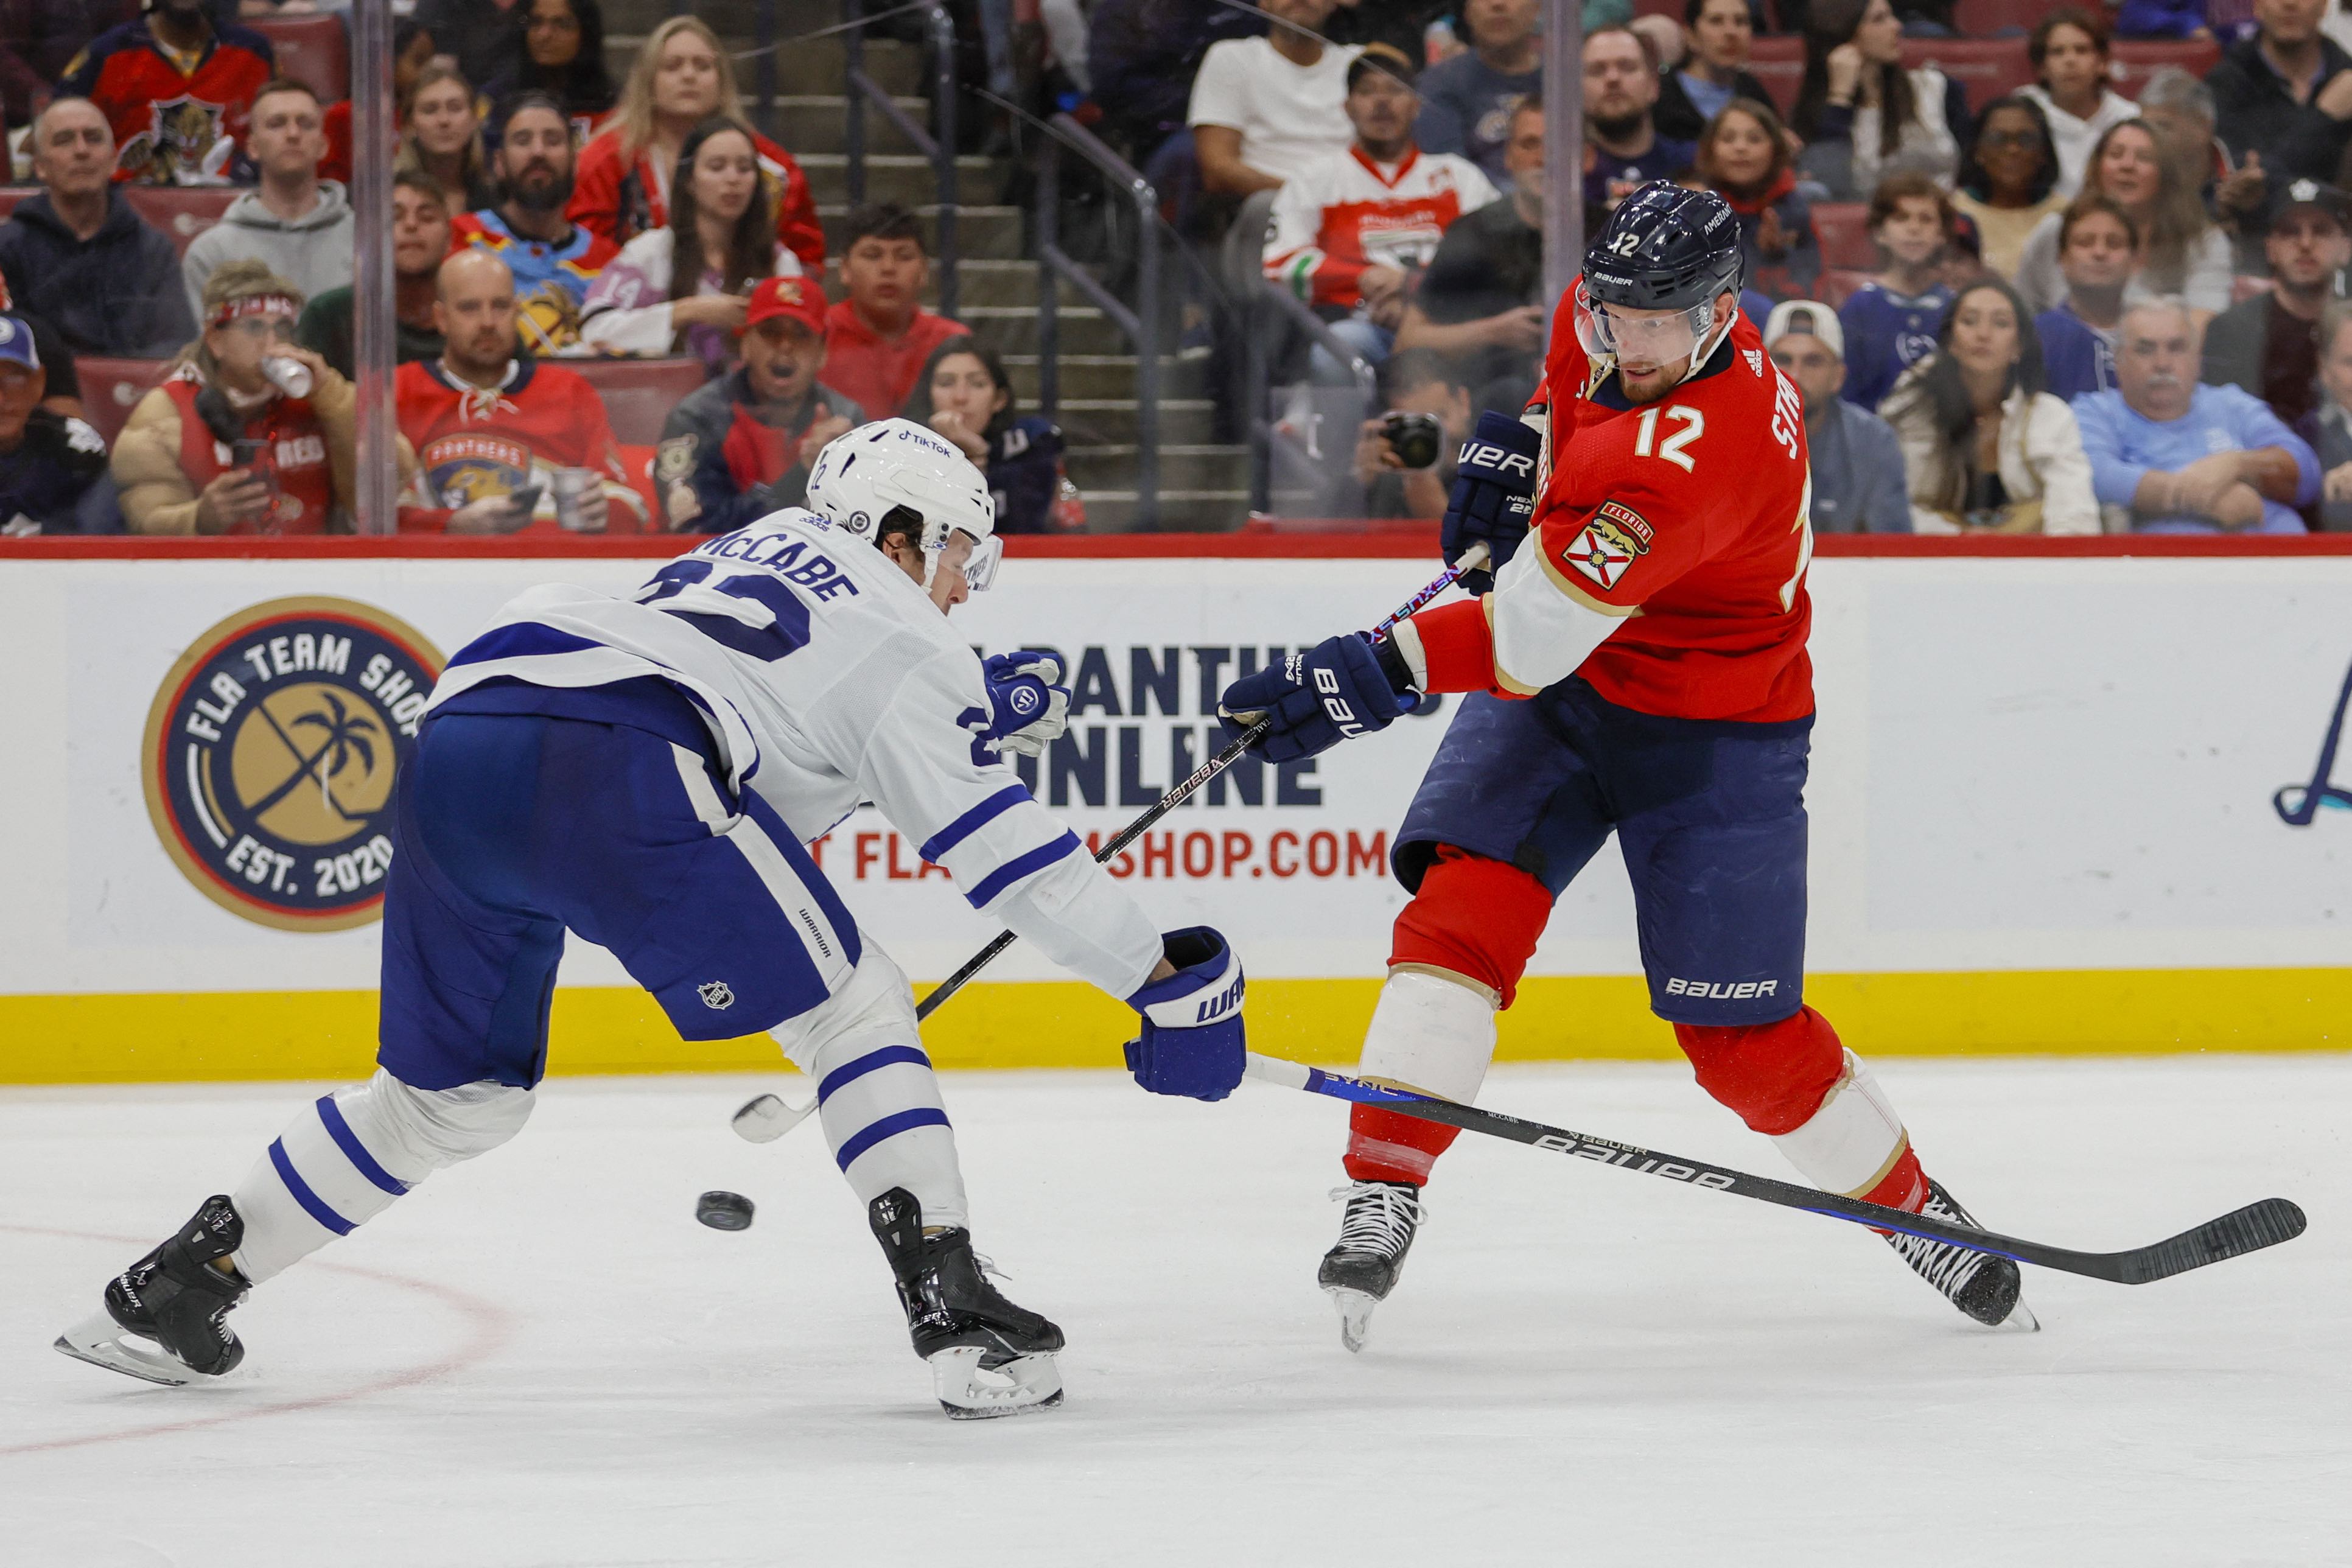 Montreal Canadiens 2022-23 Opponent Preview: Toronto Maple Leafs